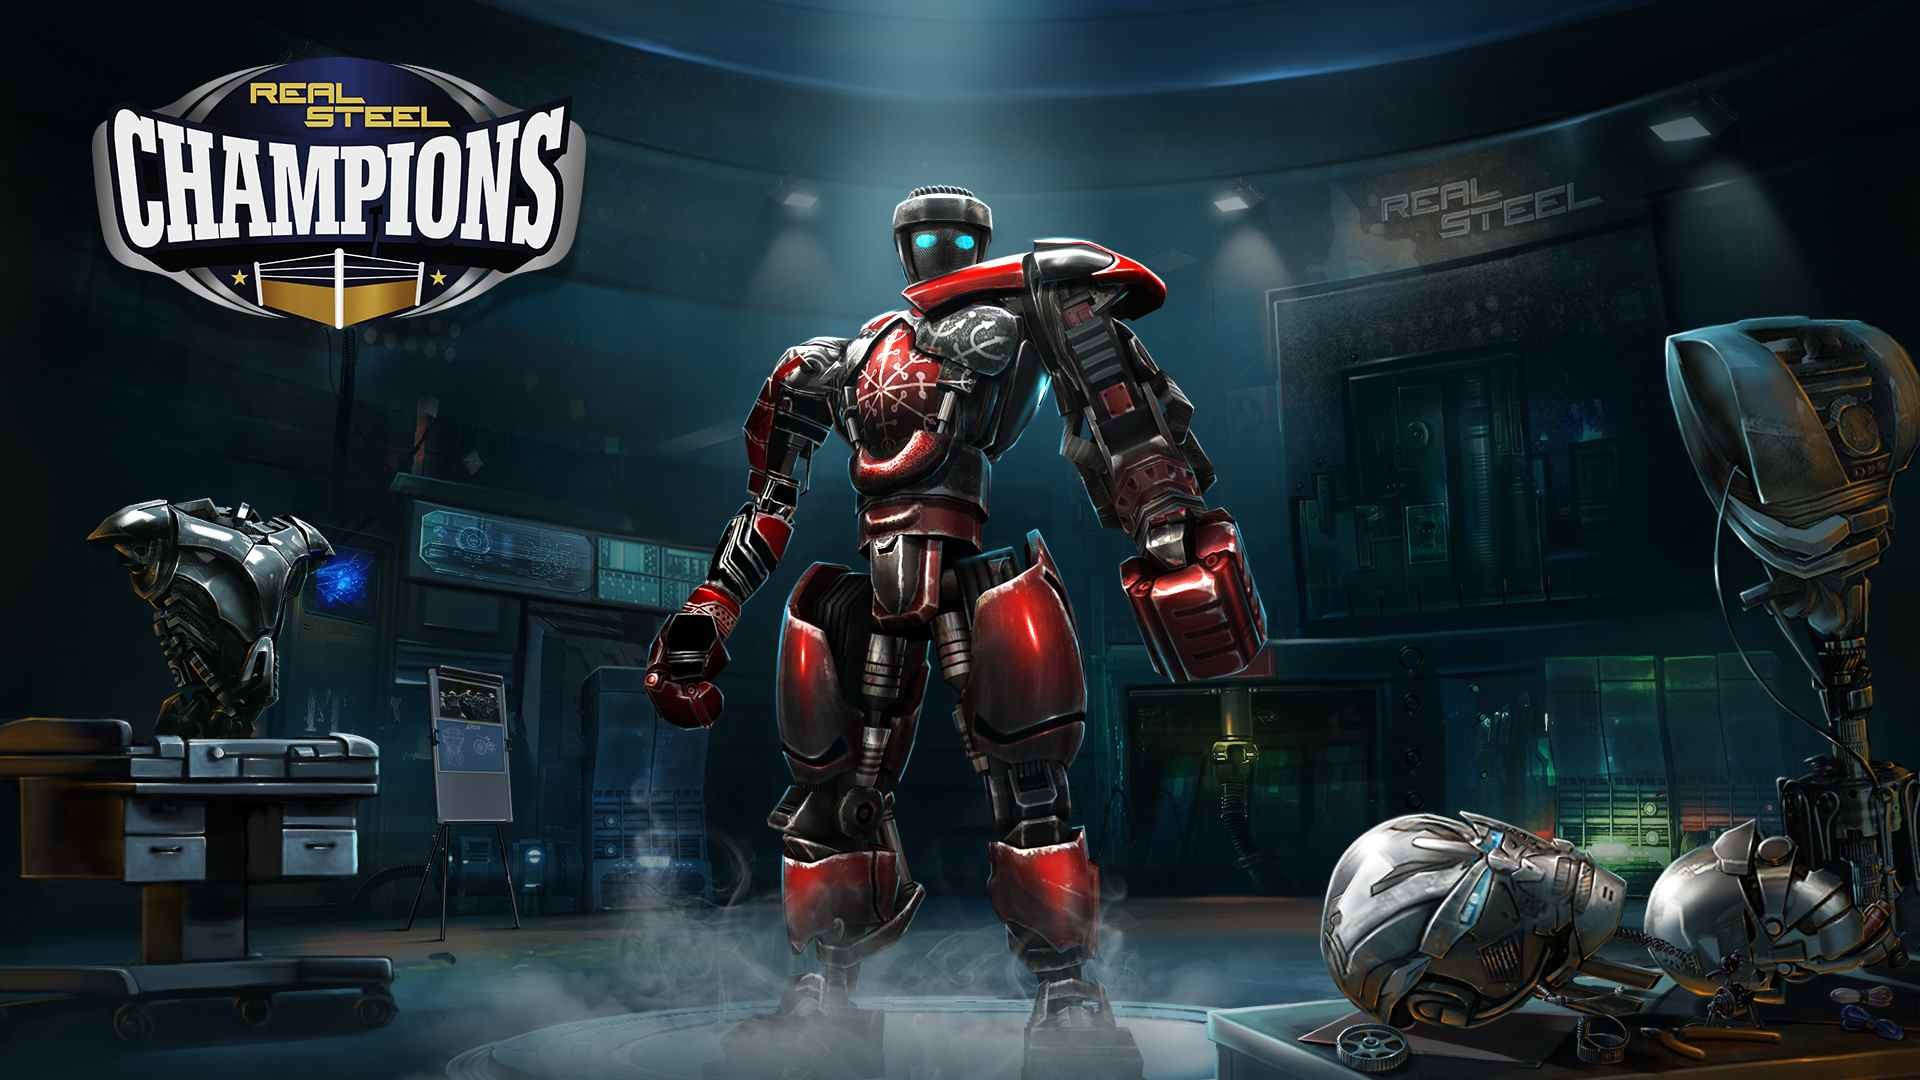 "Real Steel Champions" has been released for iOS